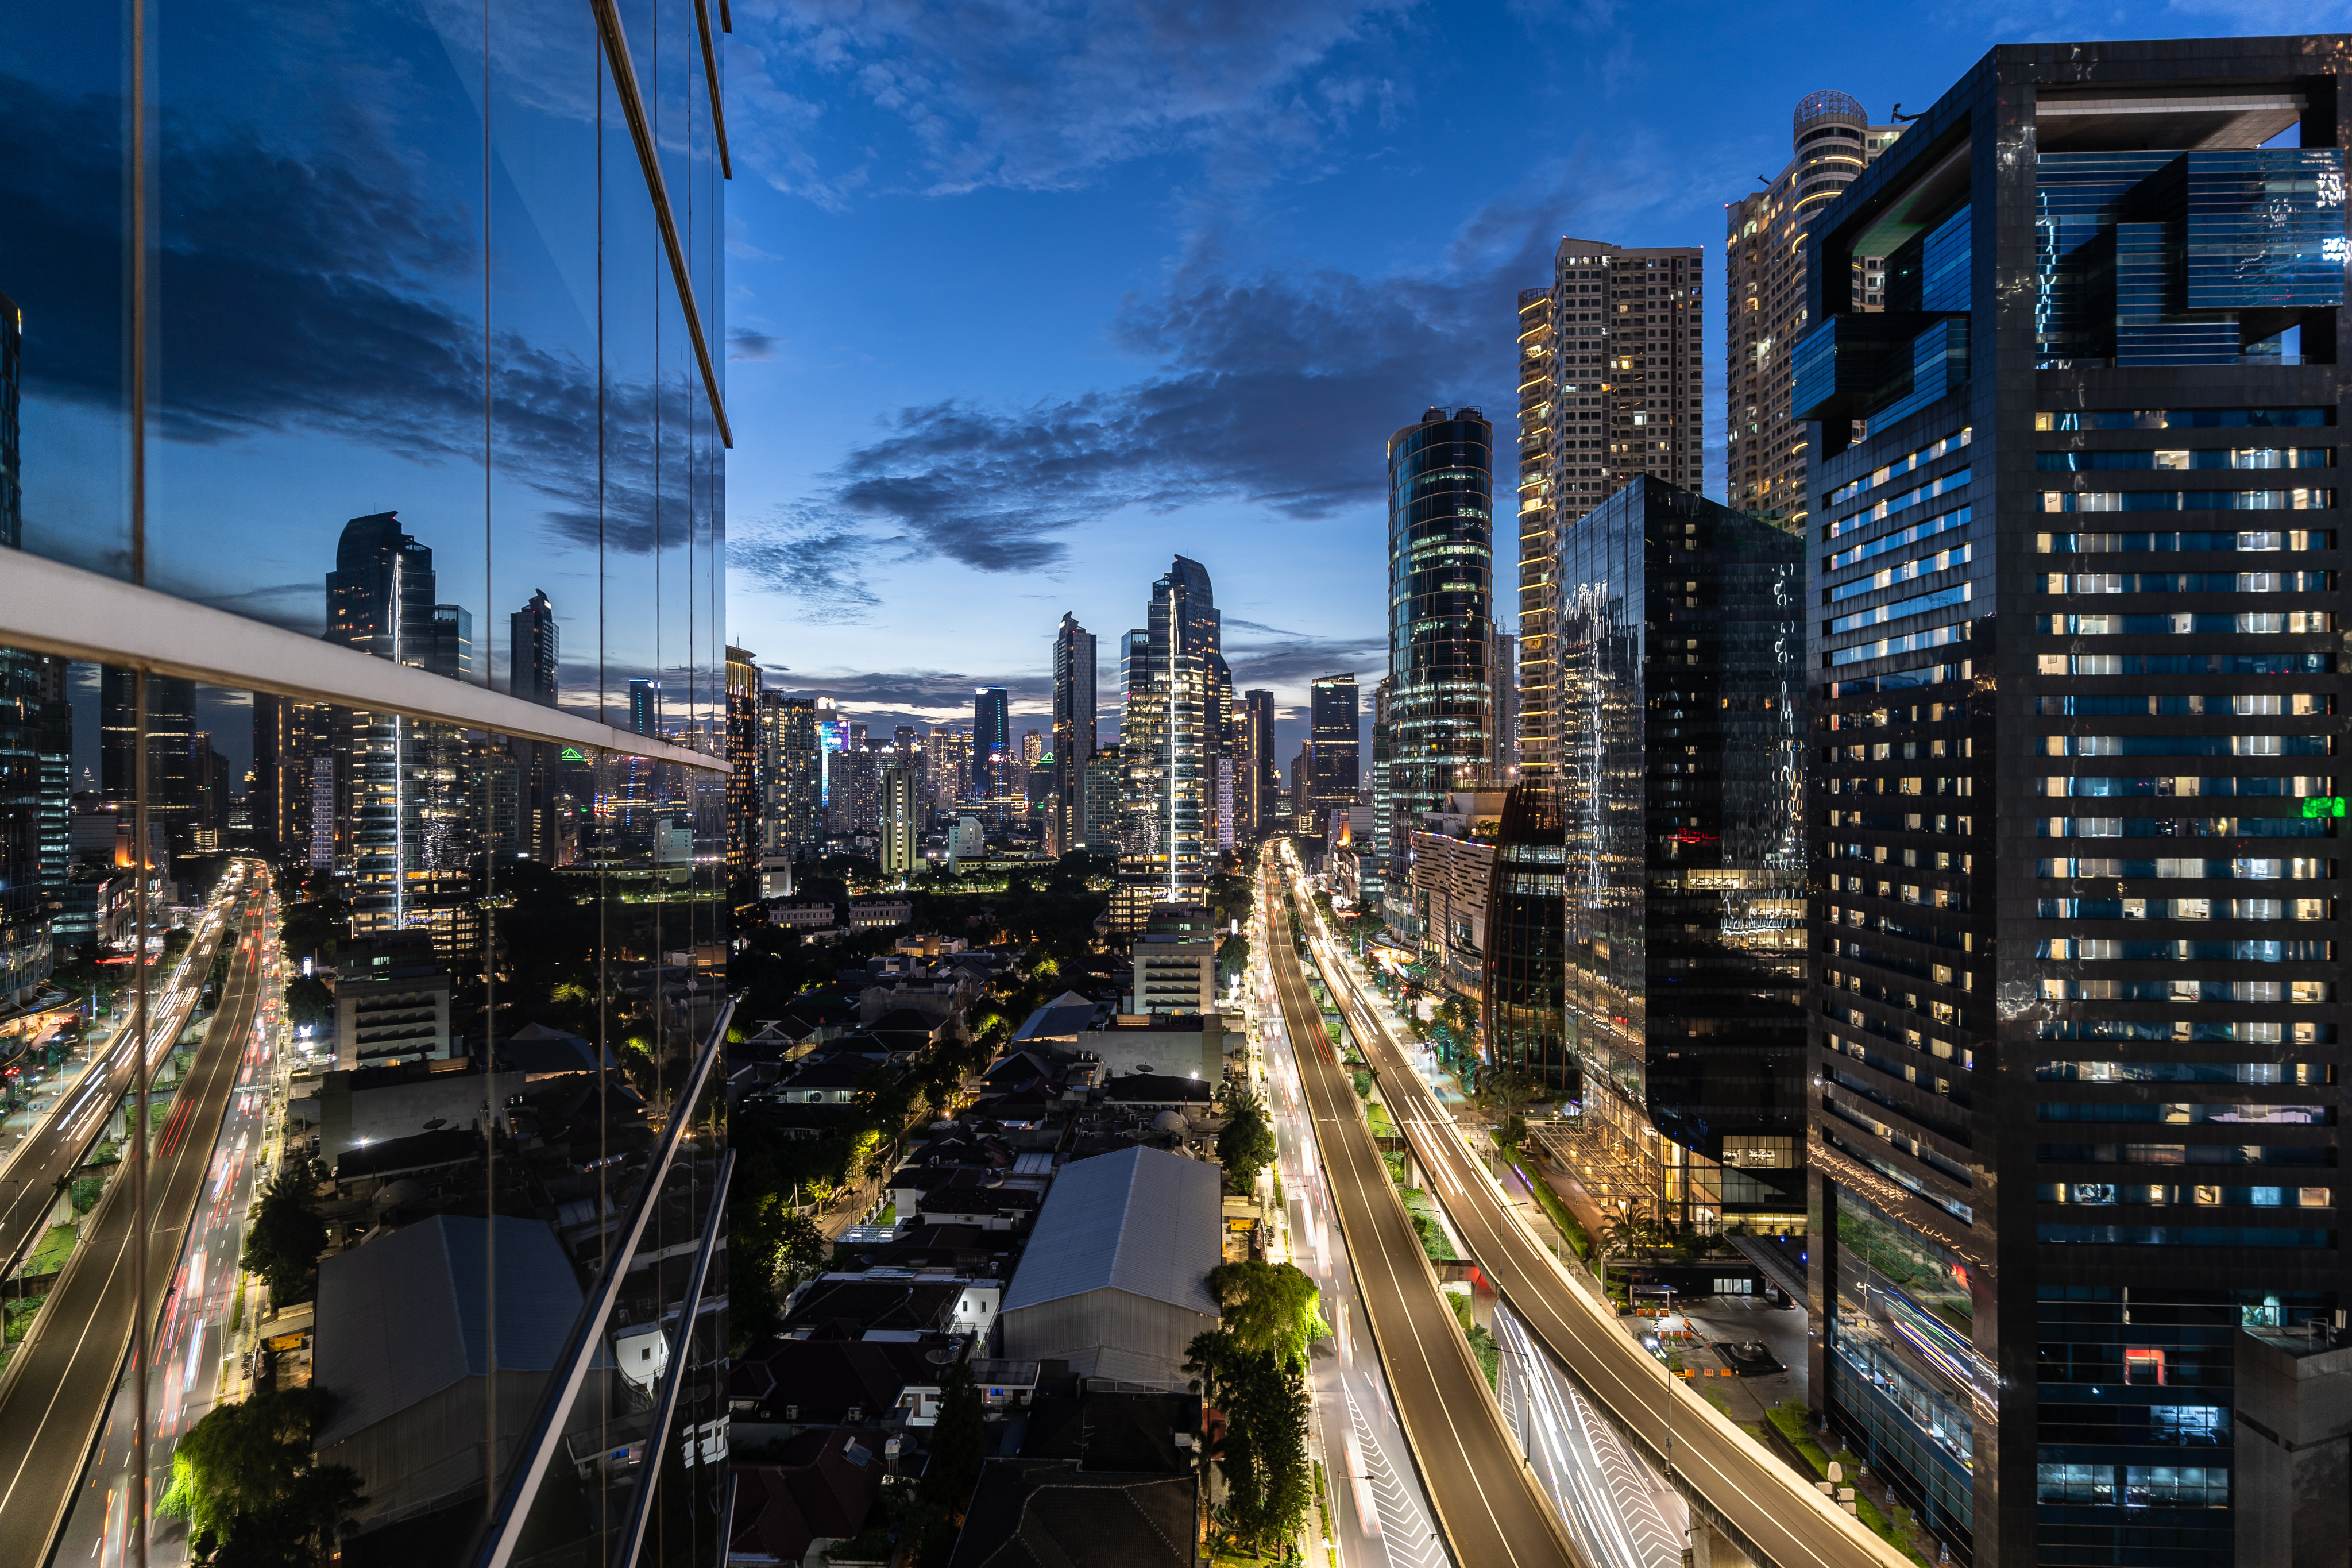 The Kuningan business district in Jakarta. Indonesia is now the top foreign destination for Chinese investment in commercial property, according to Juwai IQI. Photo: Shutterstock